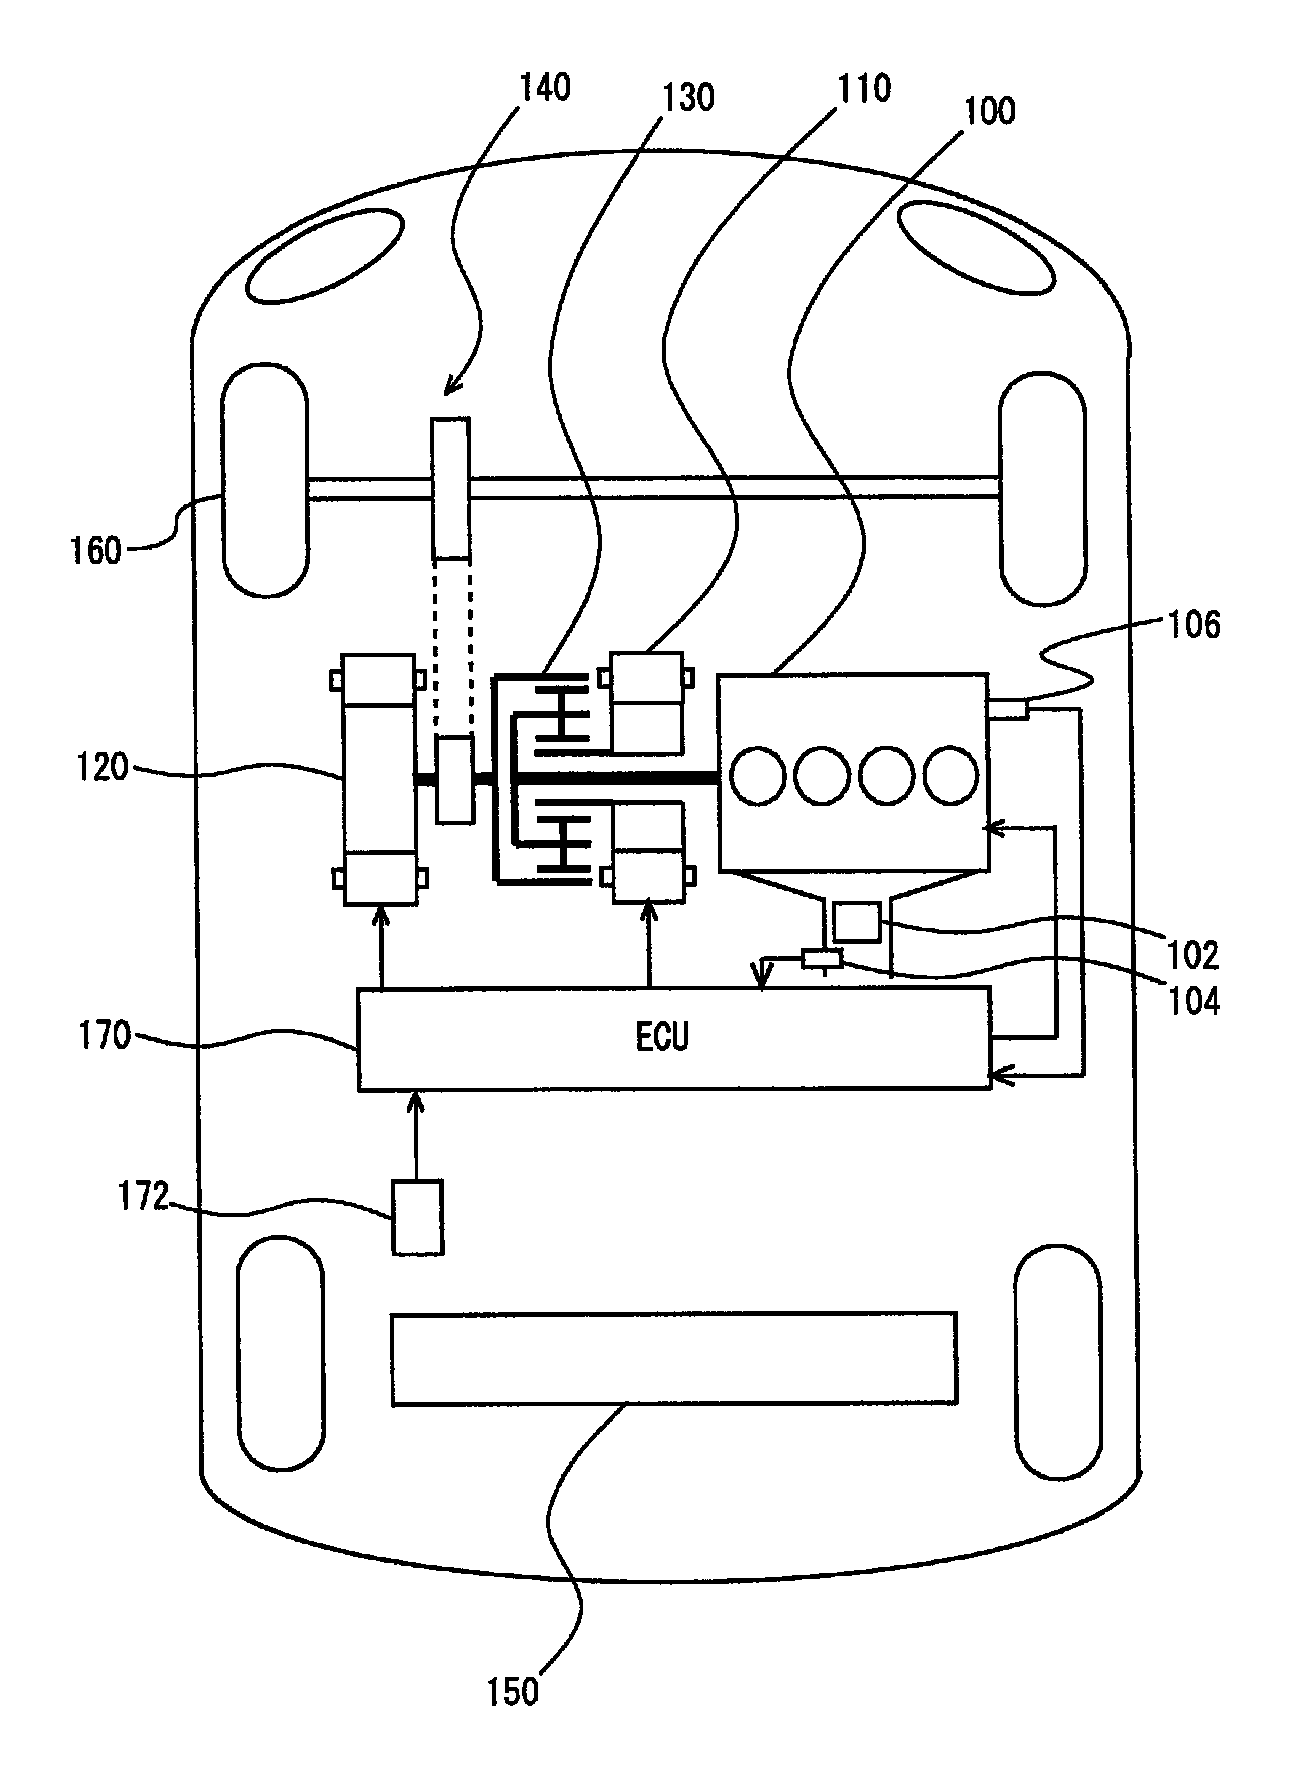 Vehicle, method and device for controlling engine